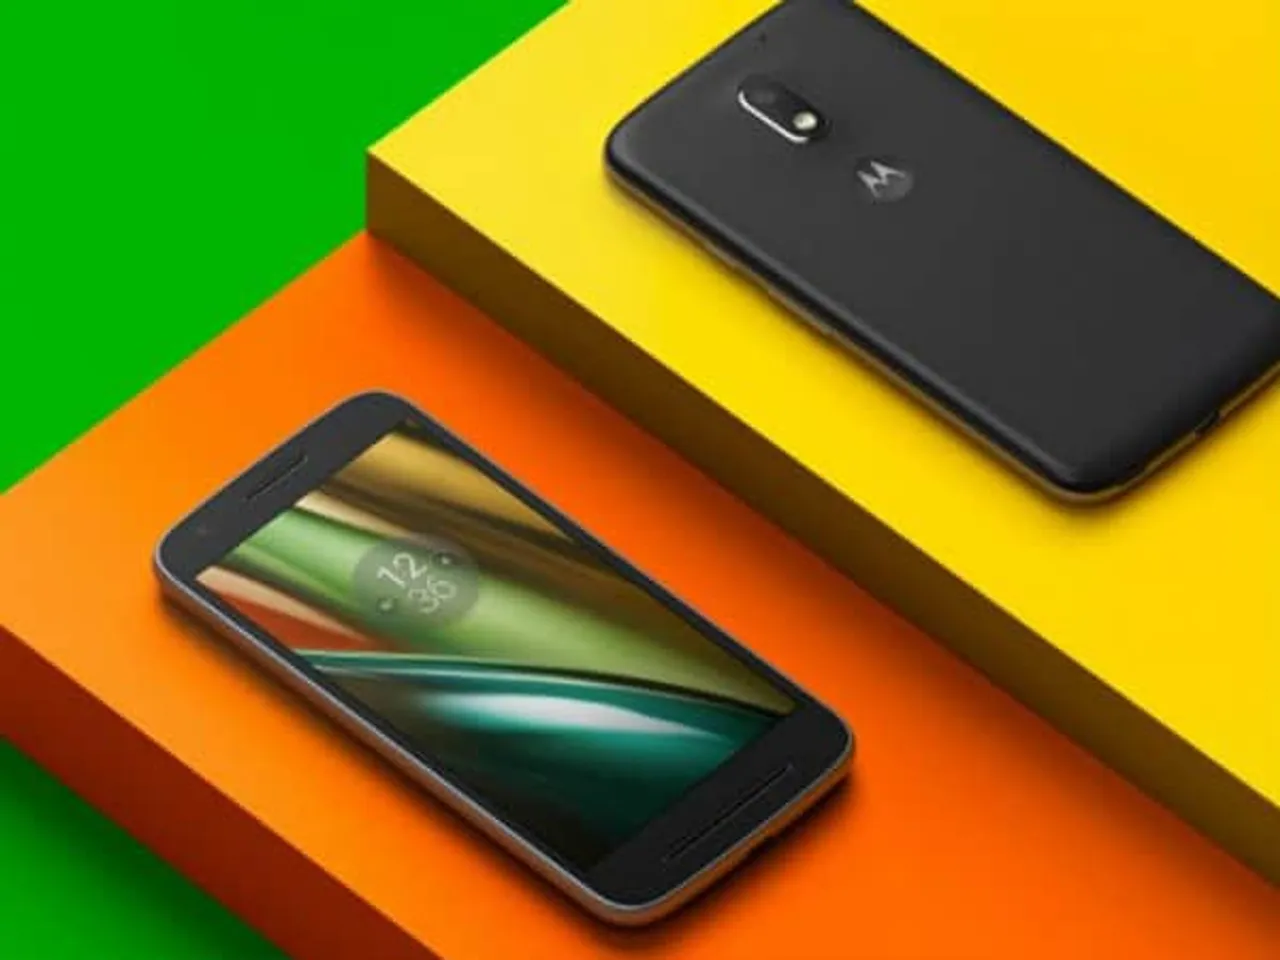 Moto E4 Available Offline in India, Ahead of its Launch